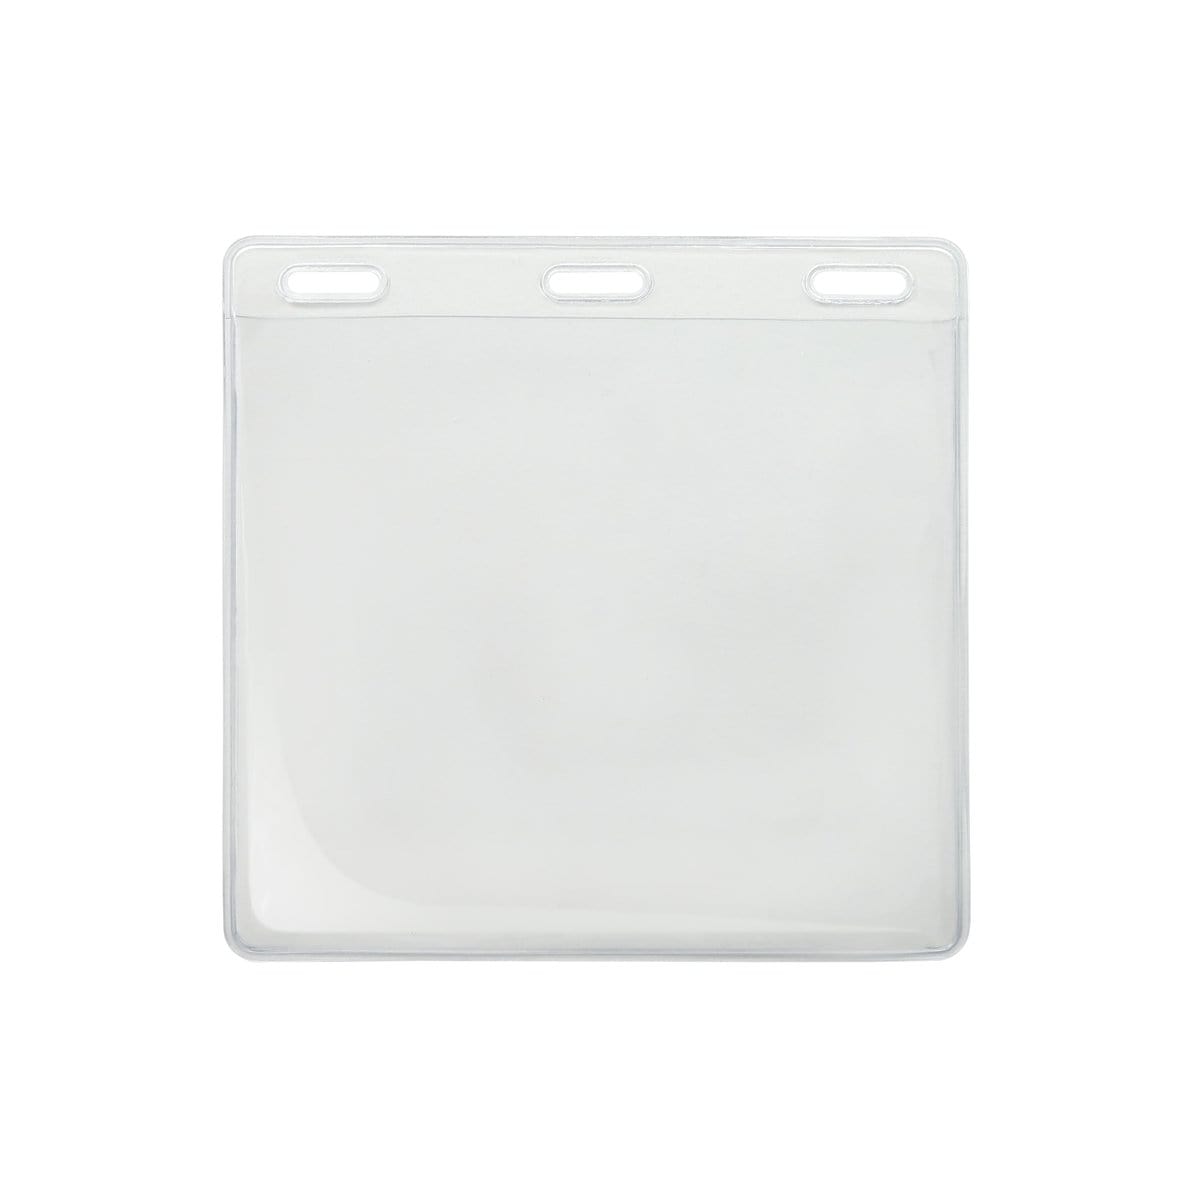 Large Vaccination Card Holder with Extra Room 4 1/4 X 3 3/4 - Clear Vinyl Horizontal Event Badge Holder (1840-1618) 1840-1618